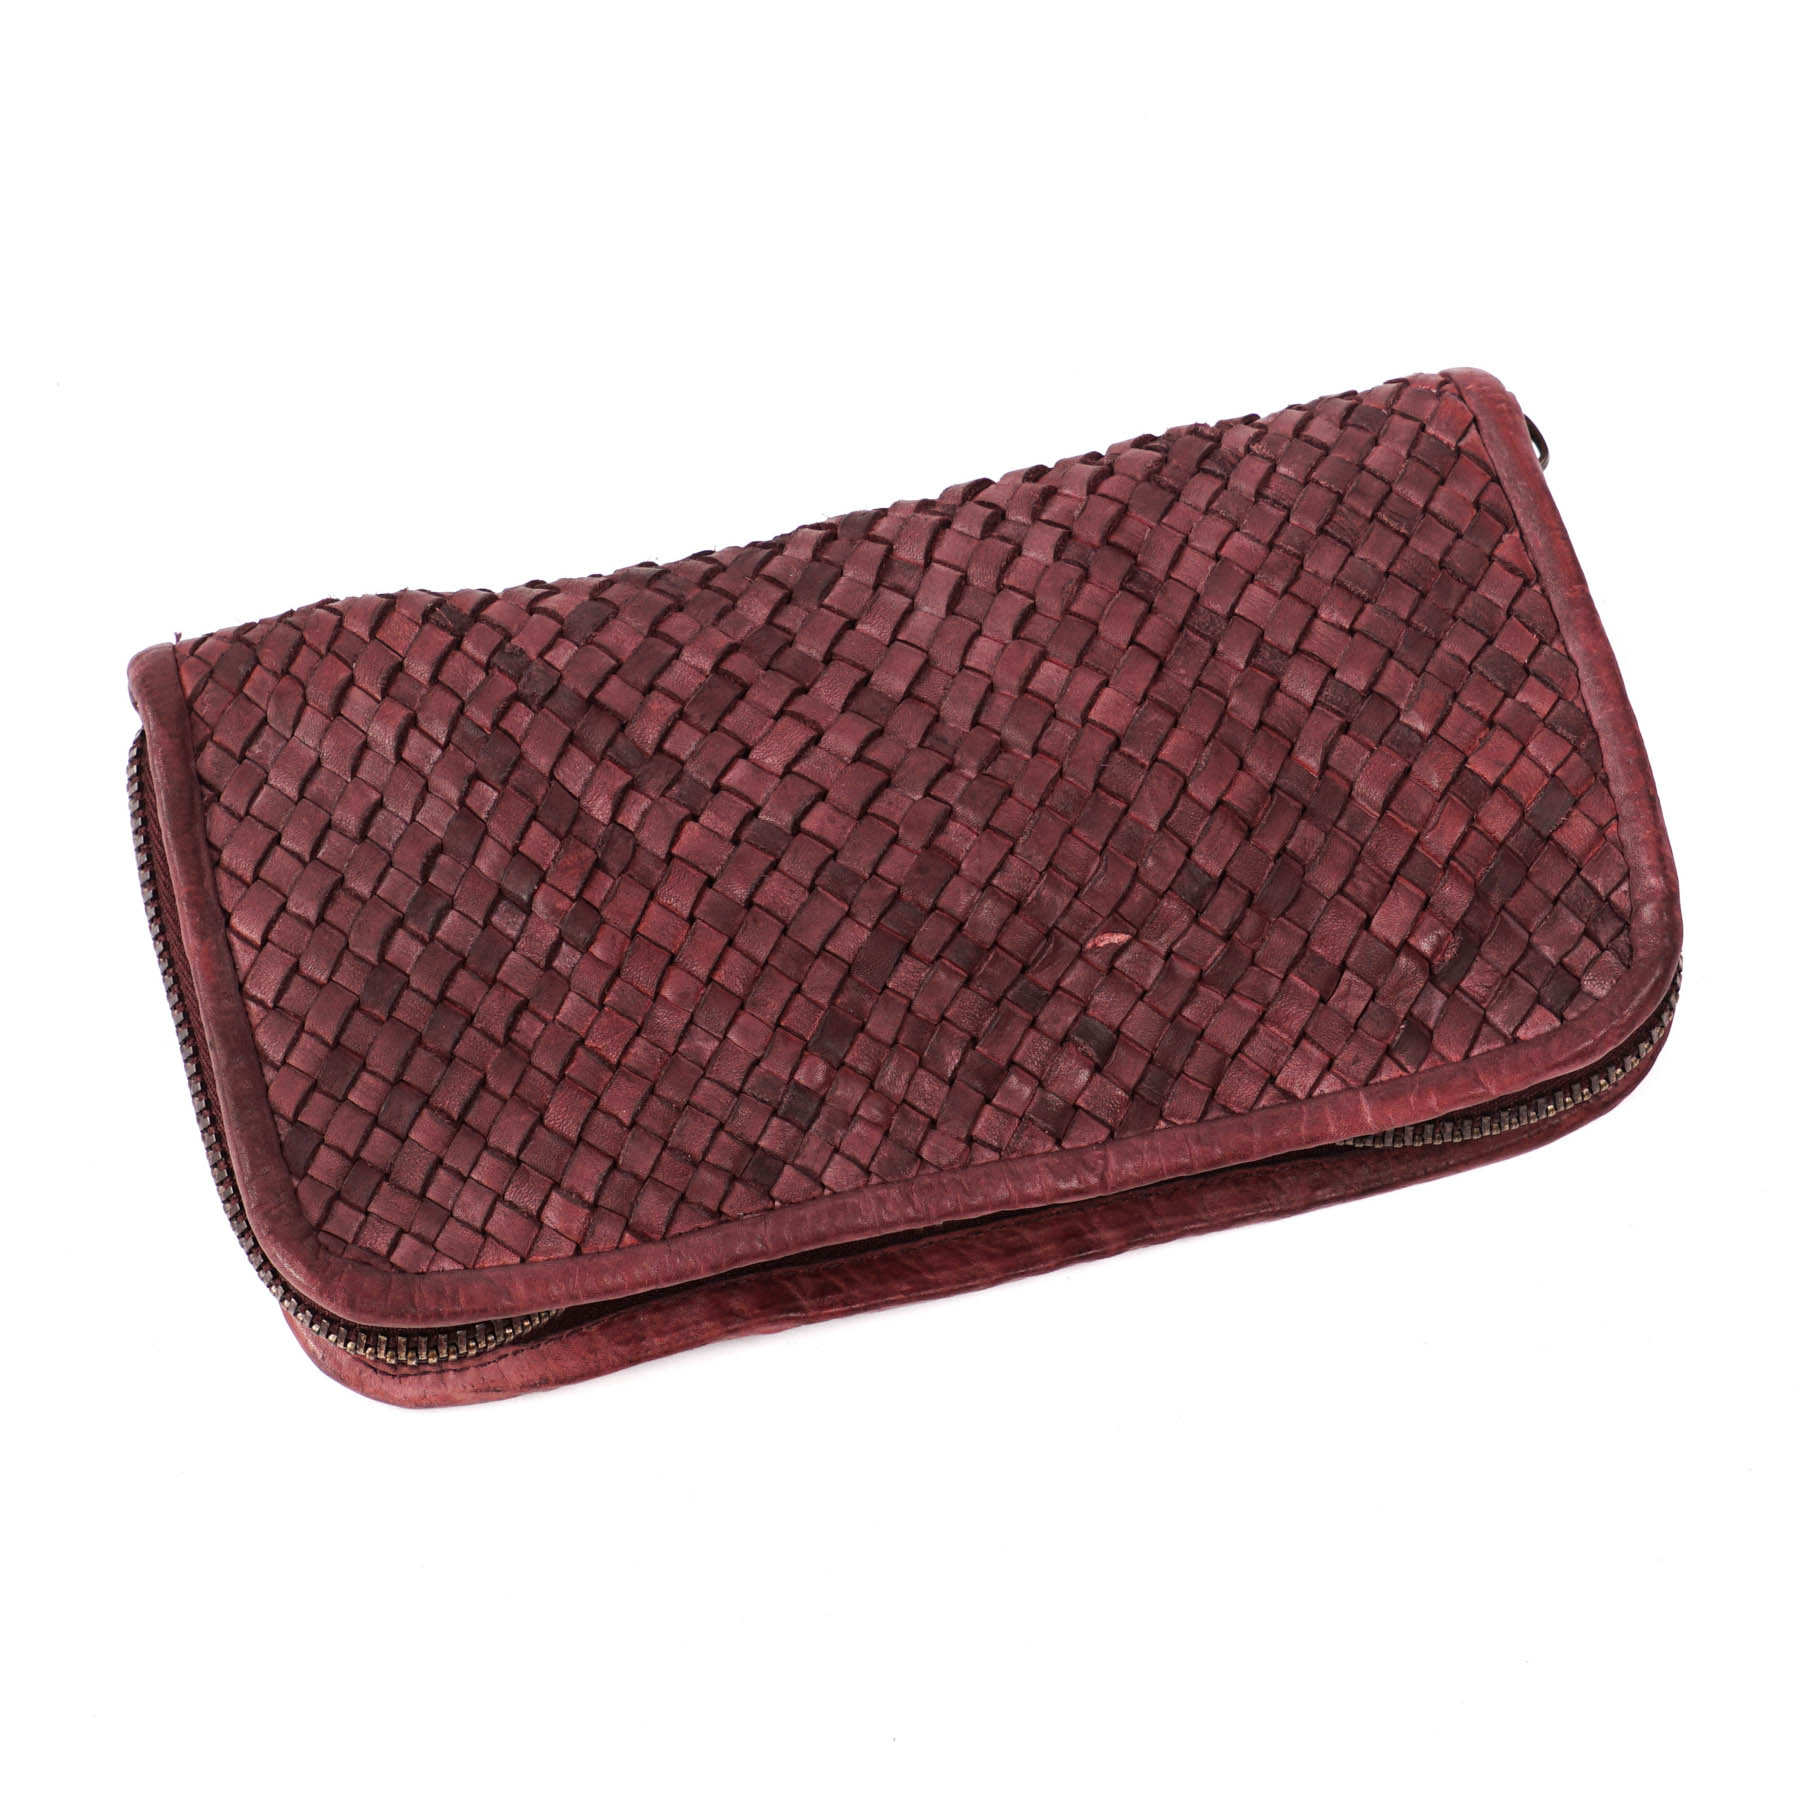 Woven washed leather womens wallet 